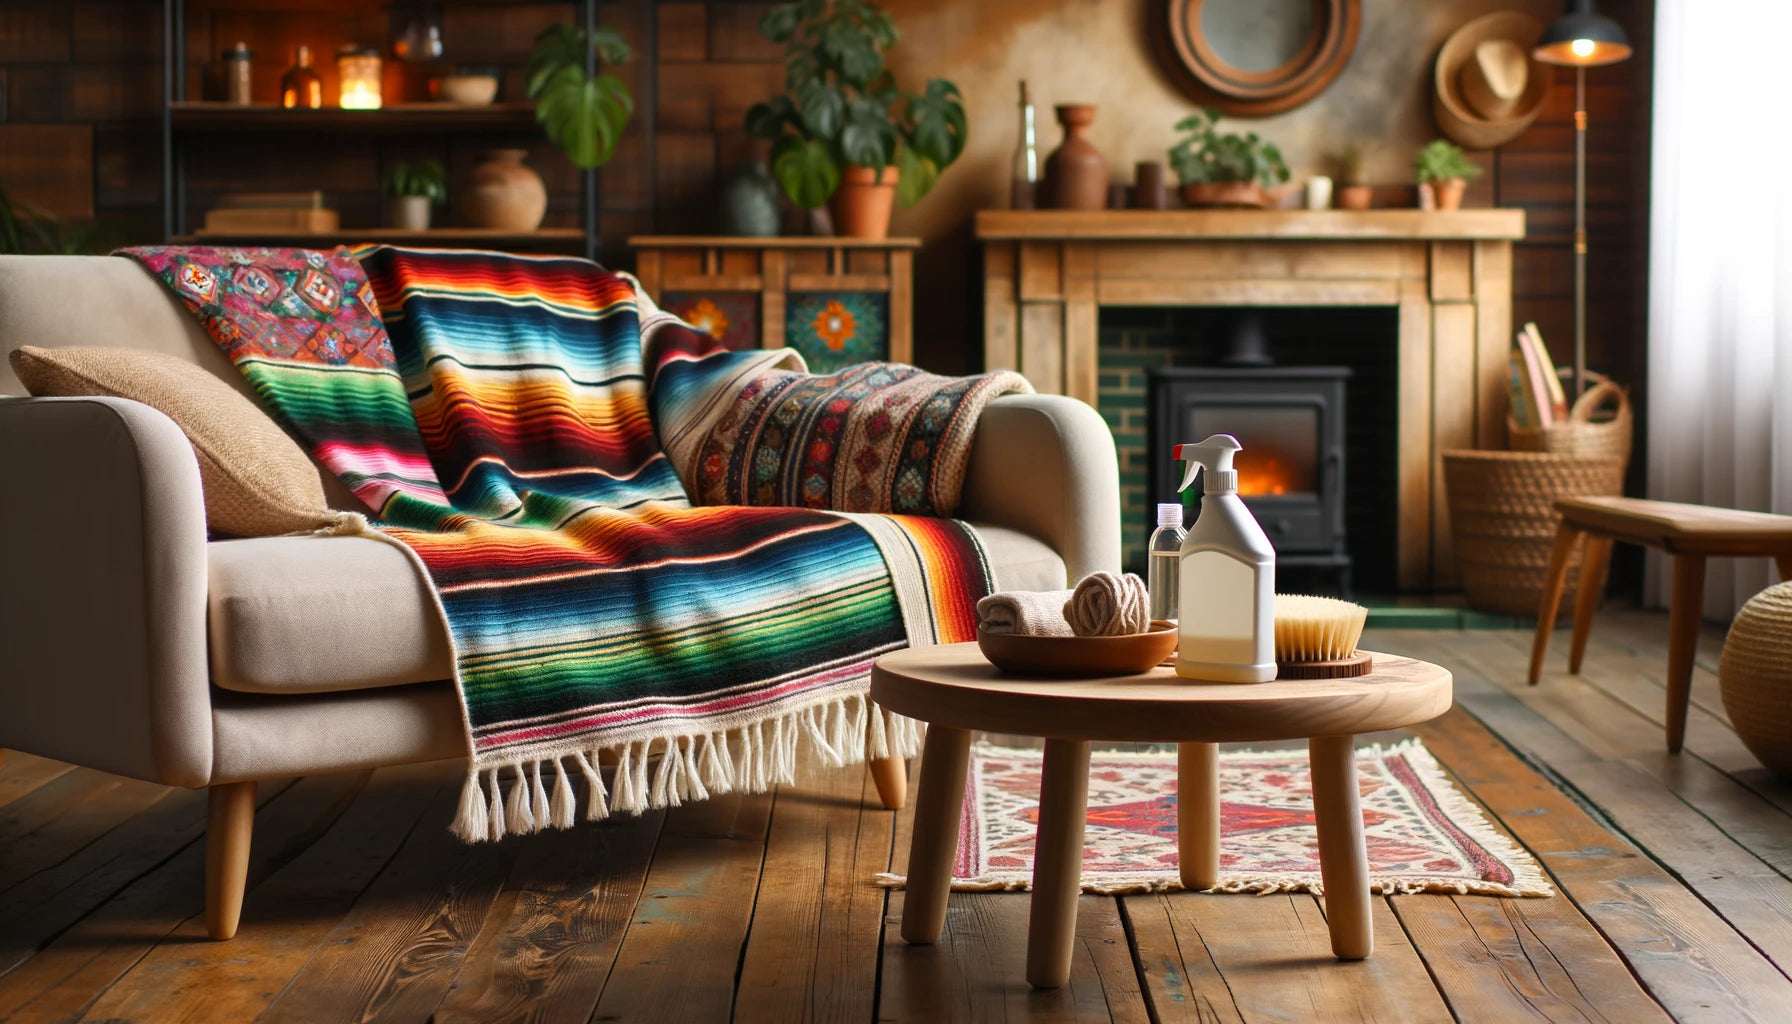 How to Clean Mexican Blanket: Expert Tips for Maintenance